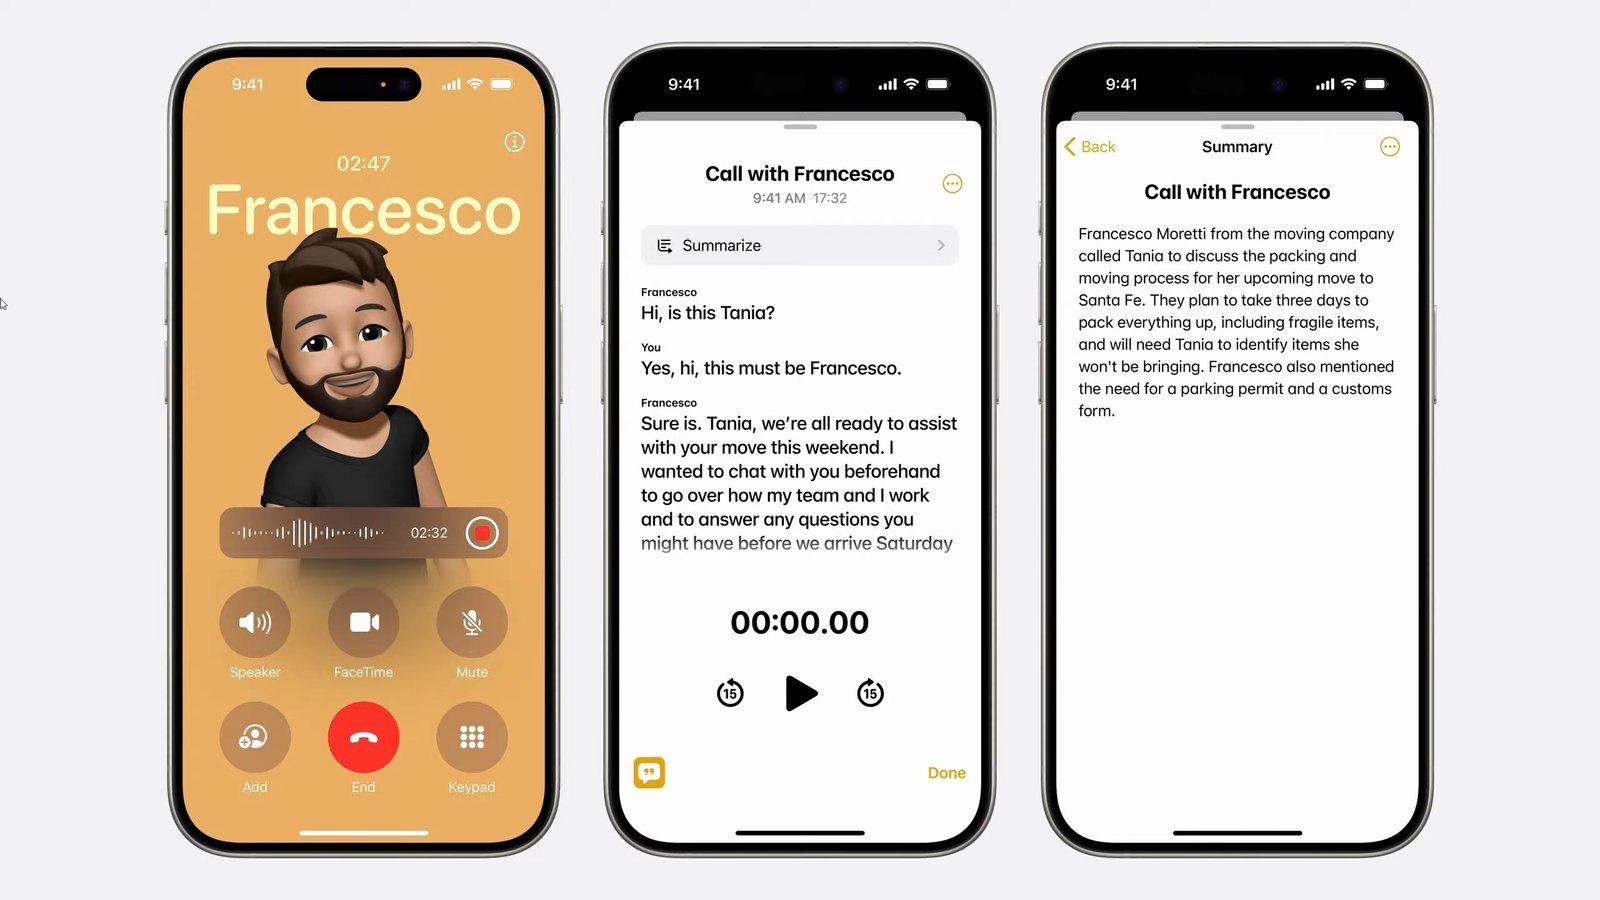 Apple finally brings call recording to iPhones with iOS 18, adds AI magic on top